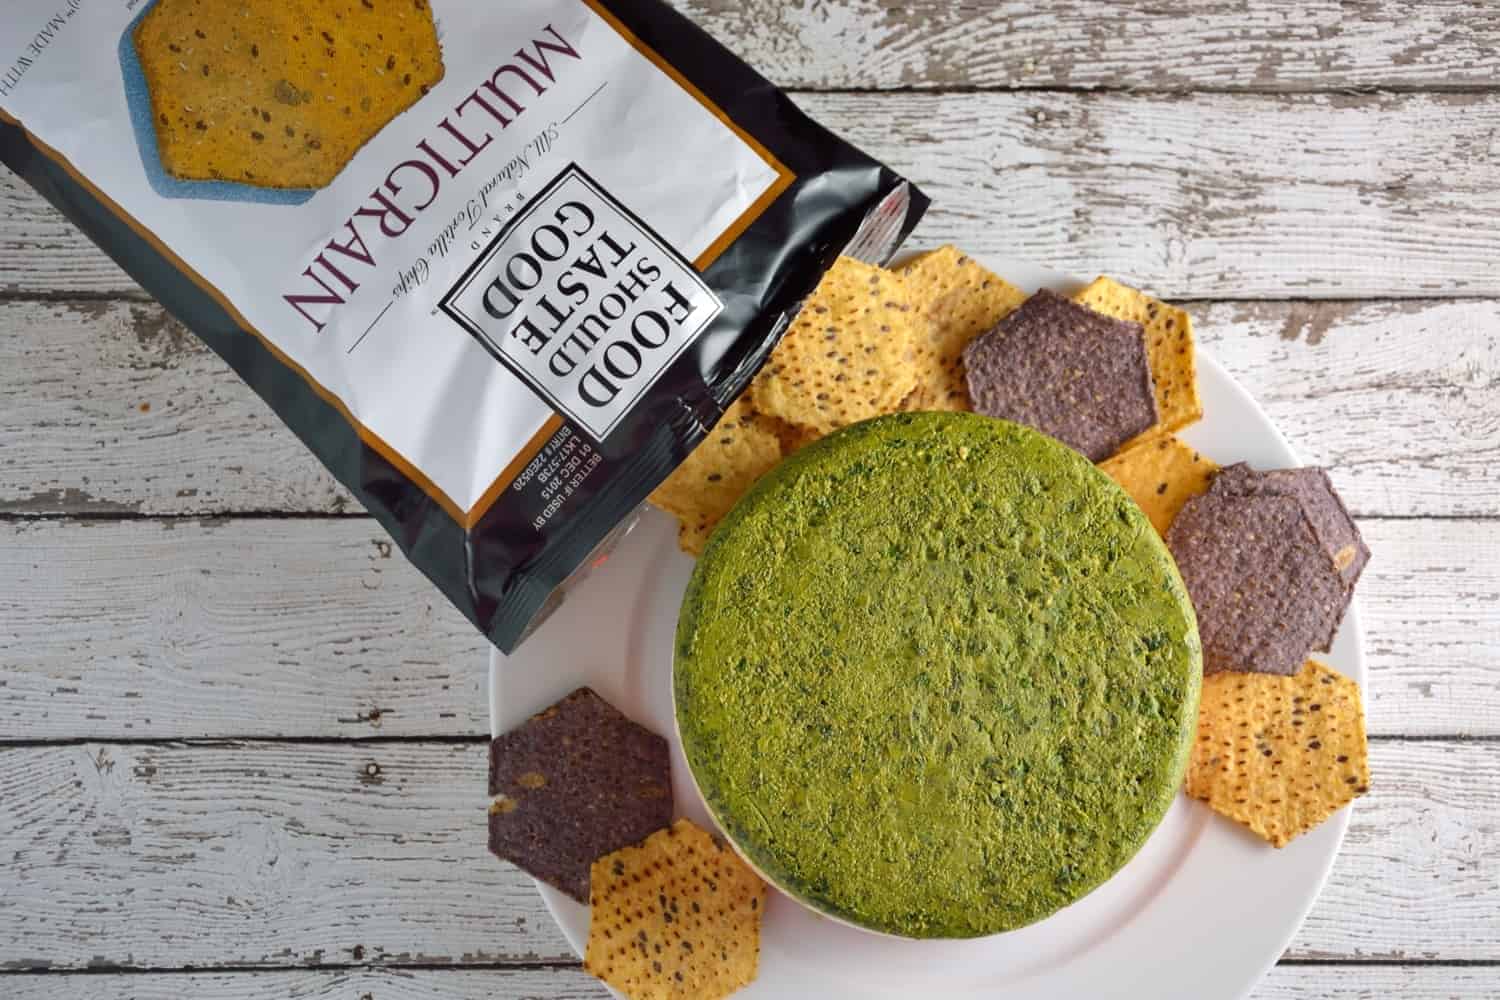  Layered Two Pesto and Ricotta Dip recipe features three distinct layers of red and green pesto with blended cheeses paired with Food Should Taste Good™ chips. | #foodshouldtastegood #sp | www.savoryexperiments.com